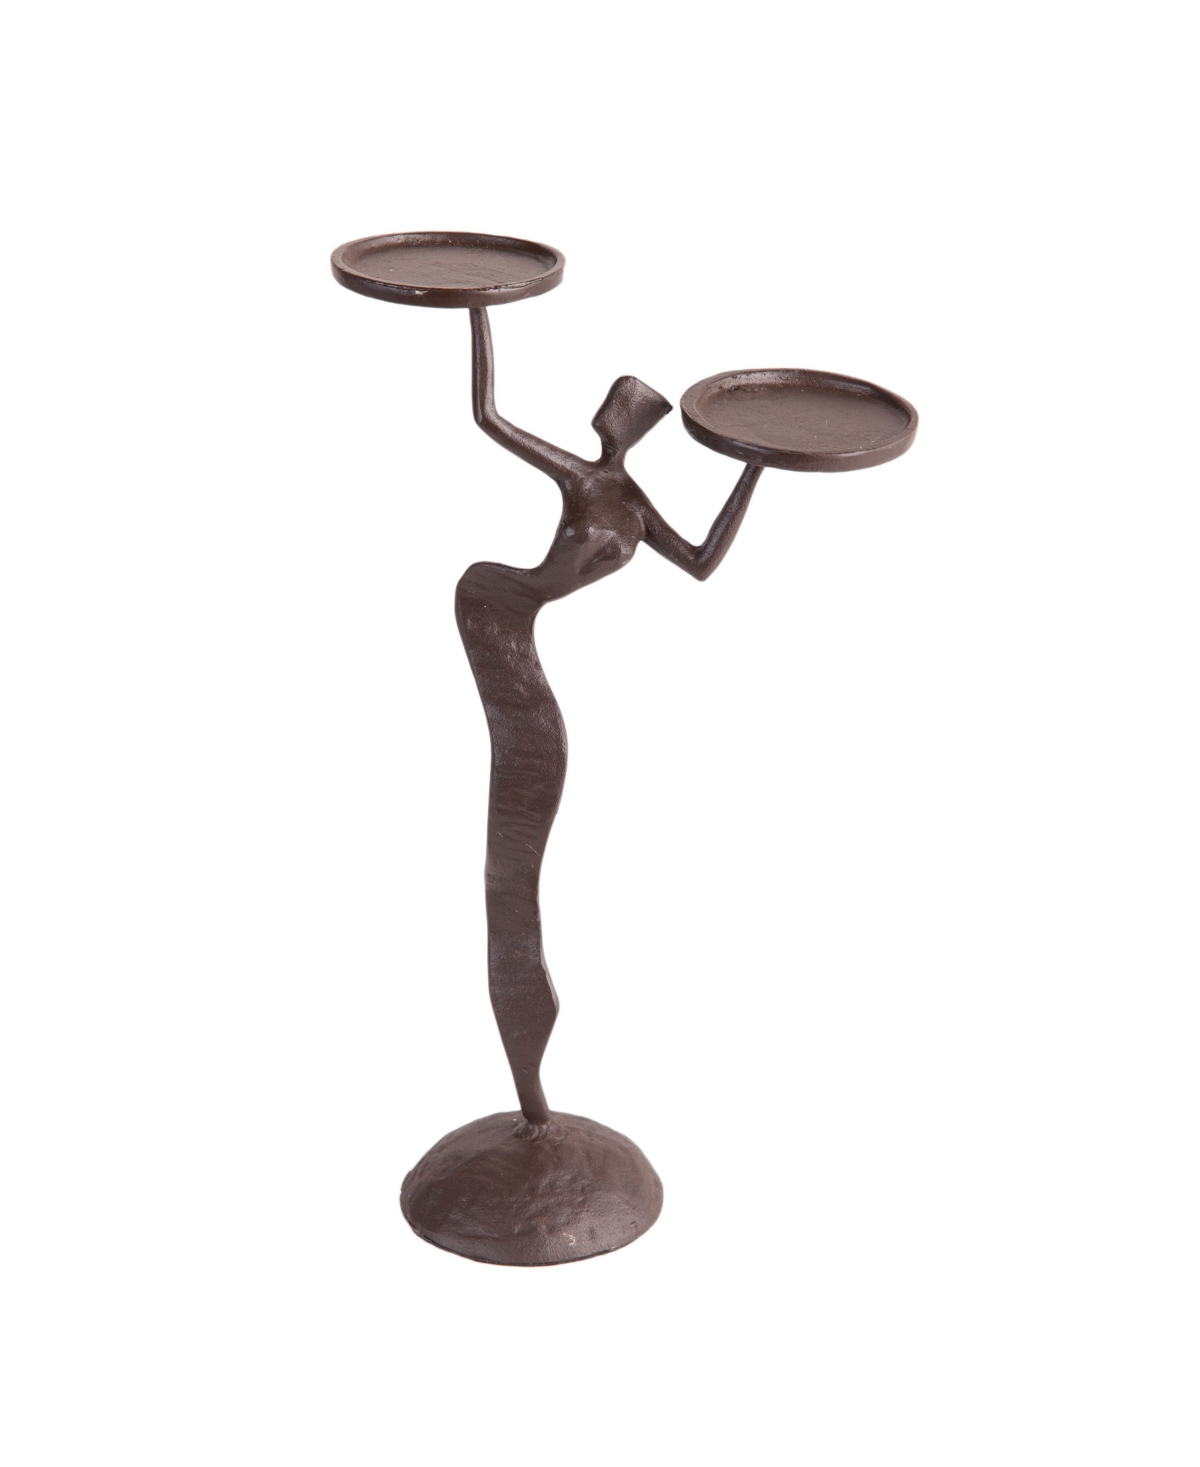 Danya B Fancy Lady Cast Iron Double Candle Holder In Dark Brown